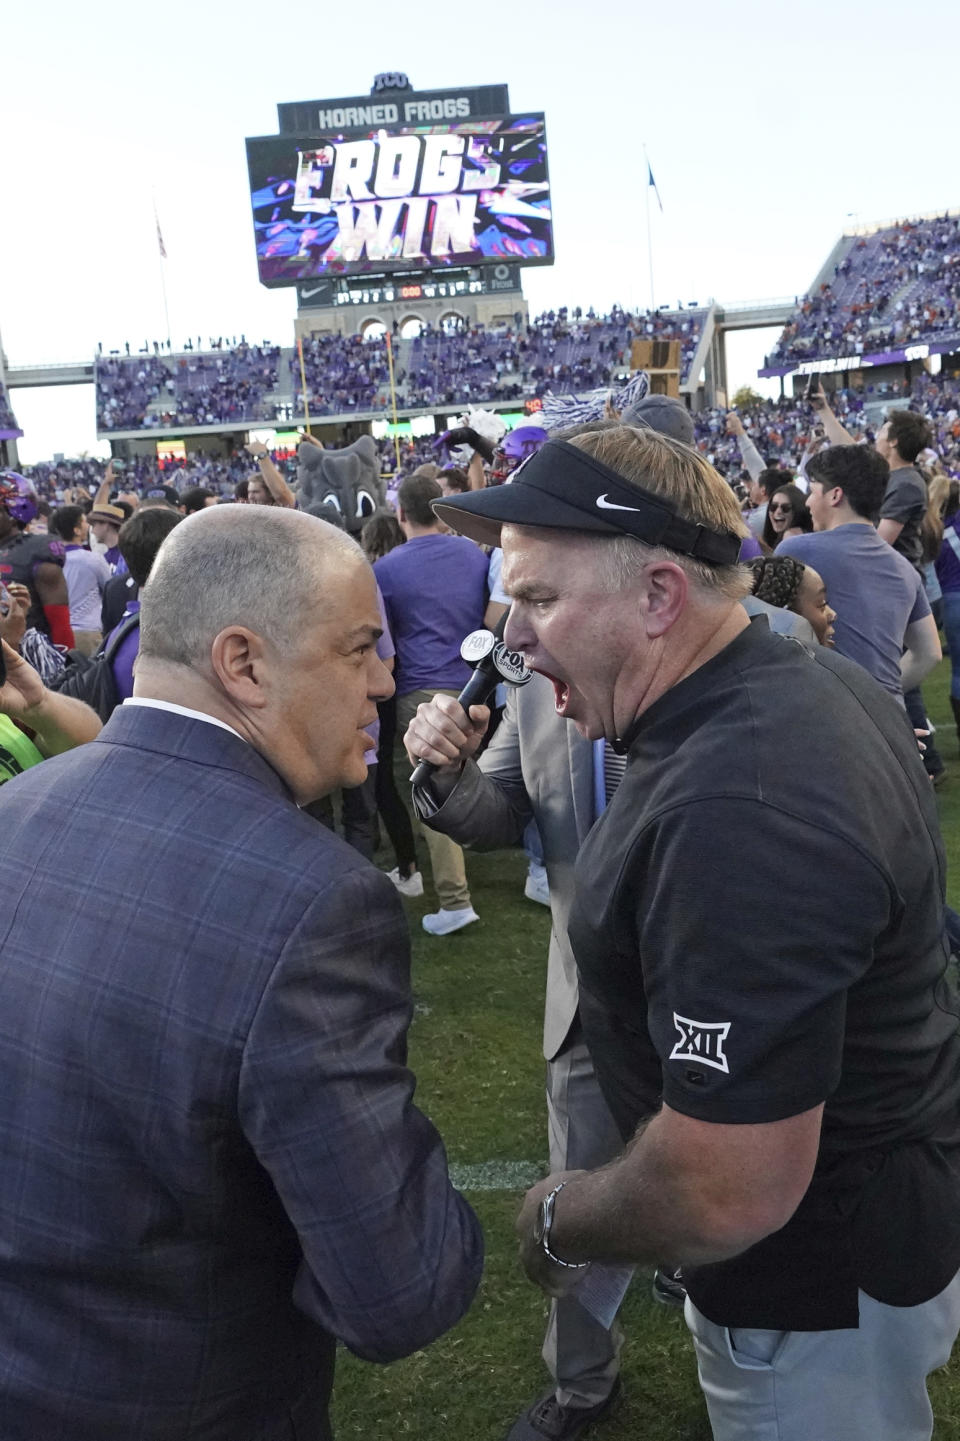 TCU head coach Gary Patterson, right, talks with a member of the media on the field after an NCAA college football game against Texas in Fort Worth, Texas, Saturday, Oct. 26, 2019. (AP Photo/Louis DeLuca)